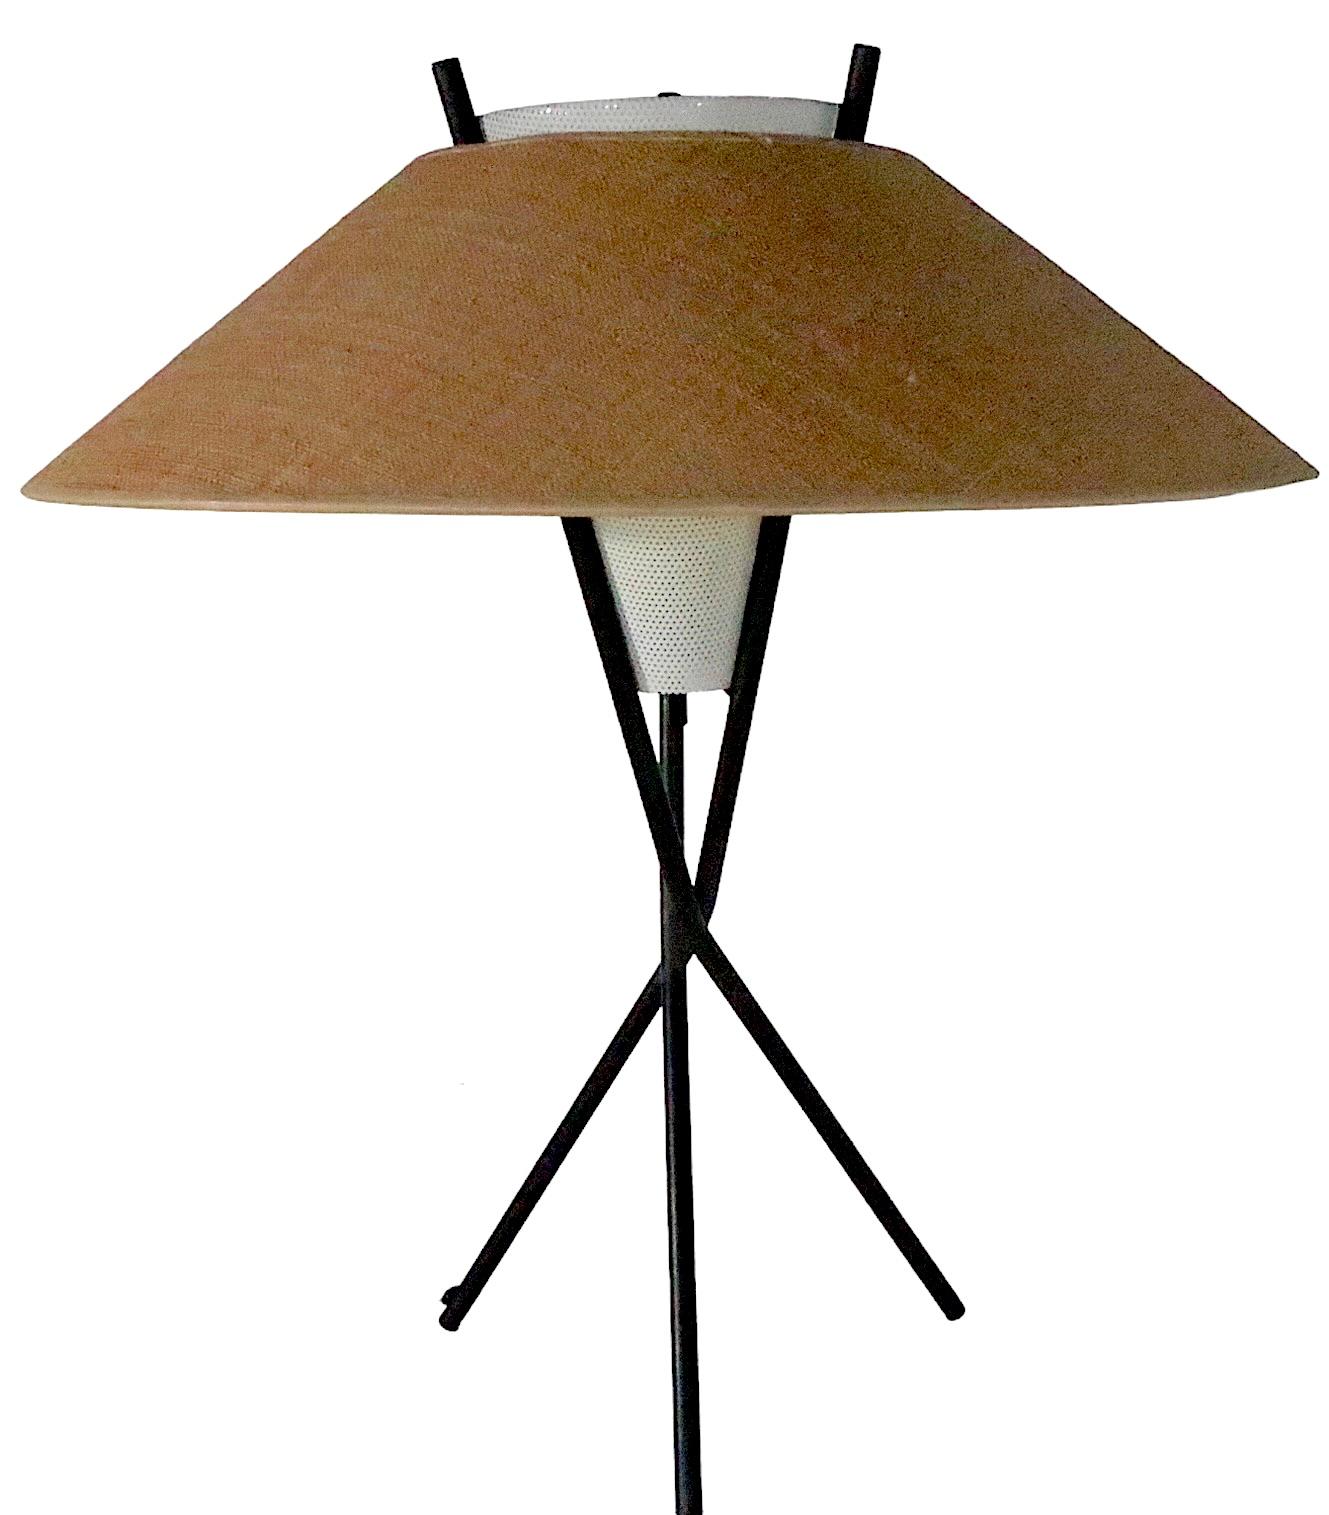 Midcentury Tri Pod Table Lamp by Gerald Thurston for Lightolier C 1950s For Sale 2